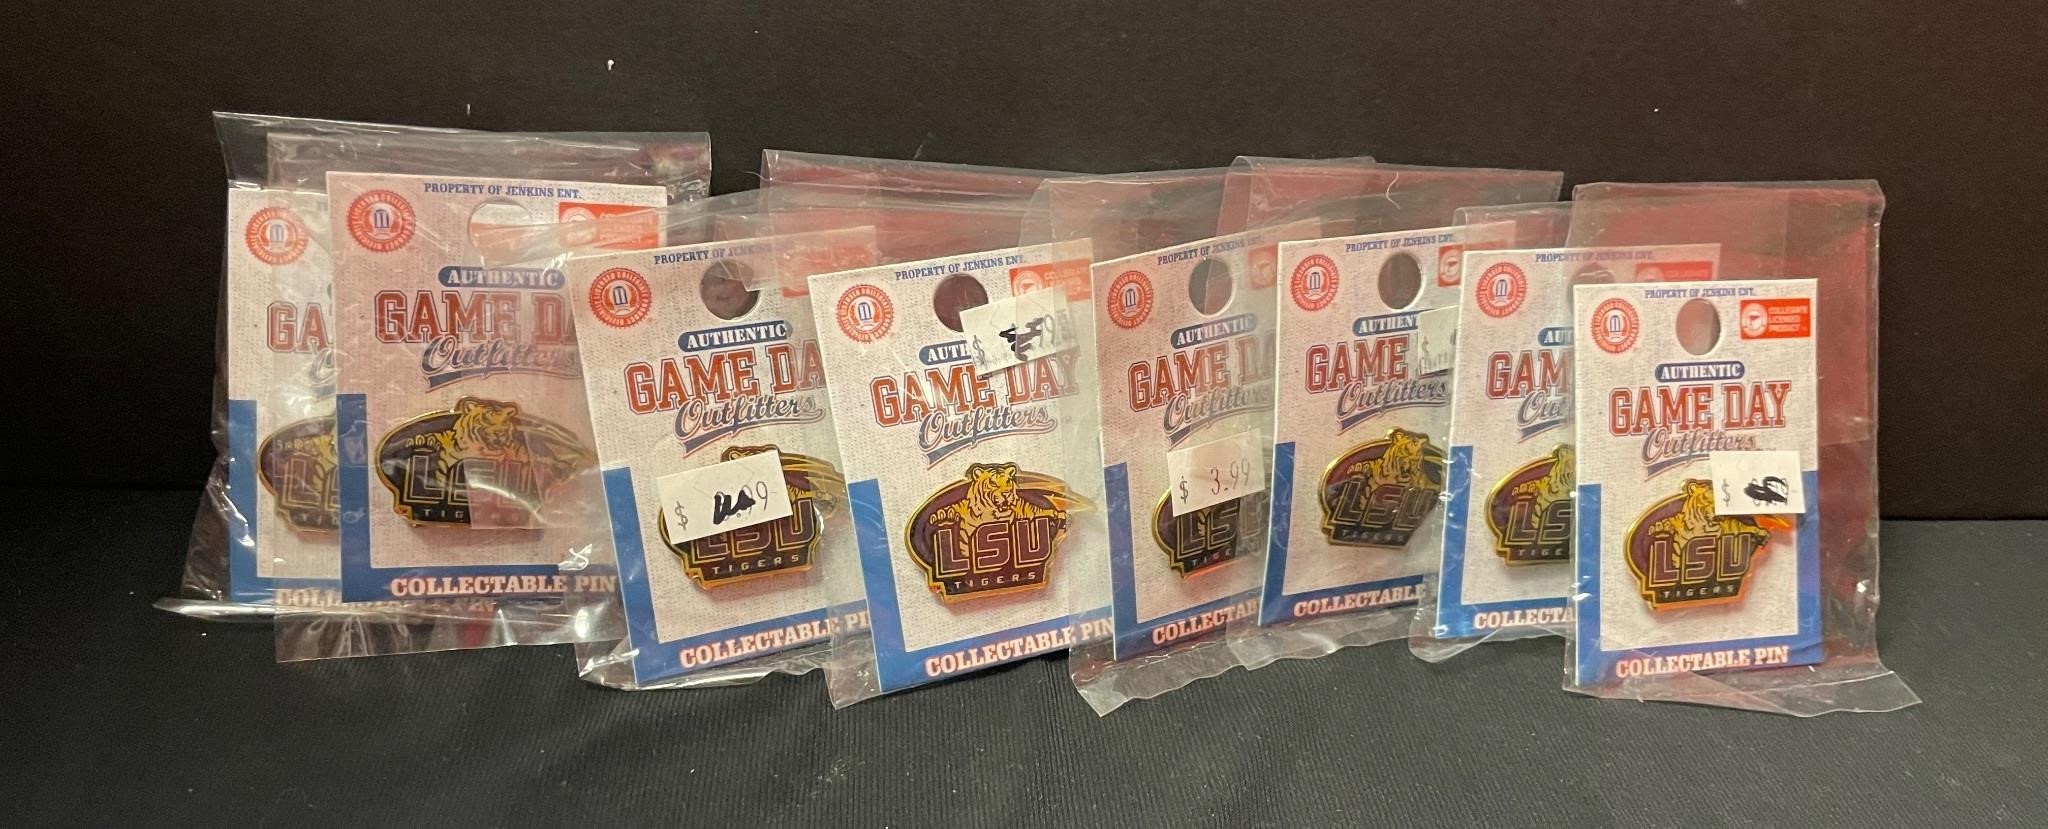 Lot of 8 LSU Gameday Collectibles Keychains